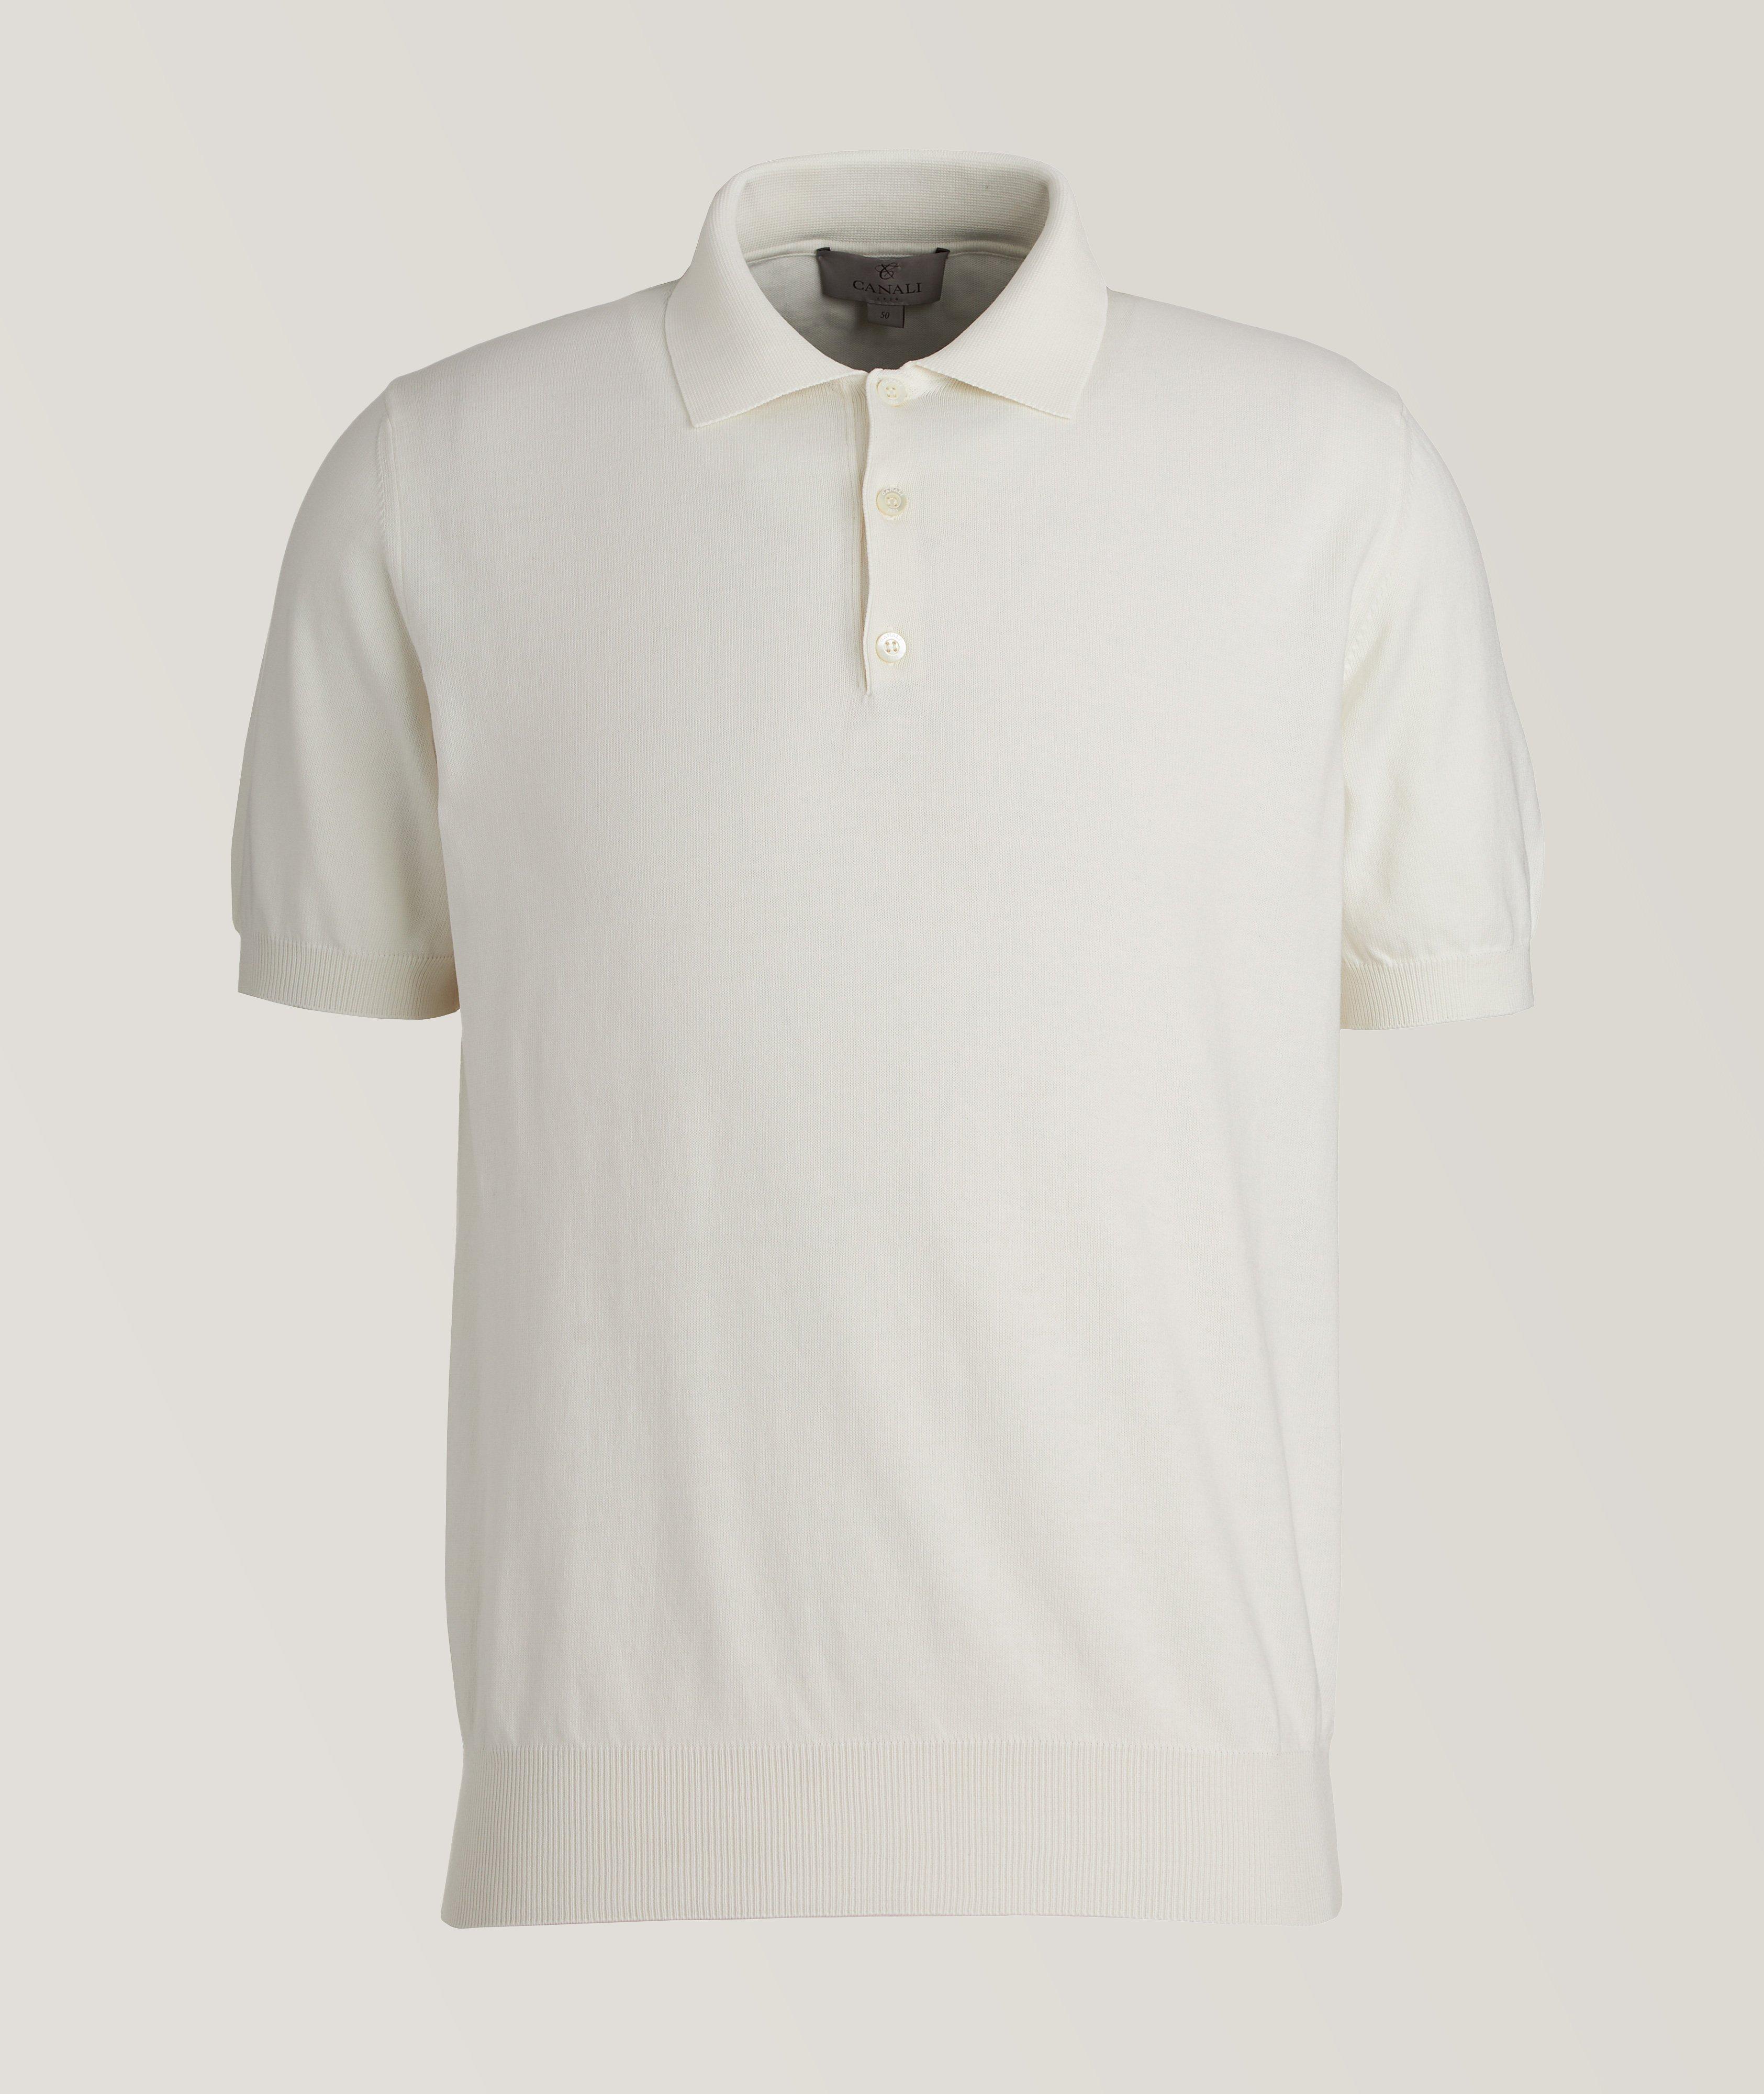 Canali Solid Cotton Knit Polo